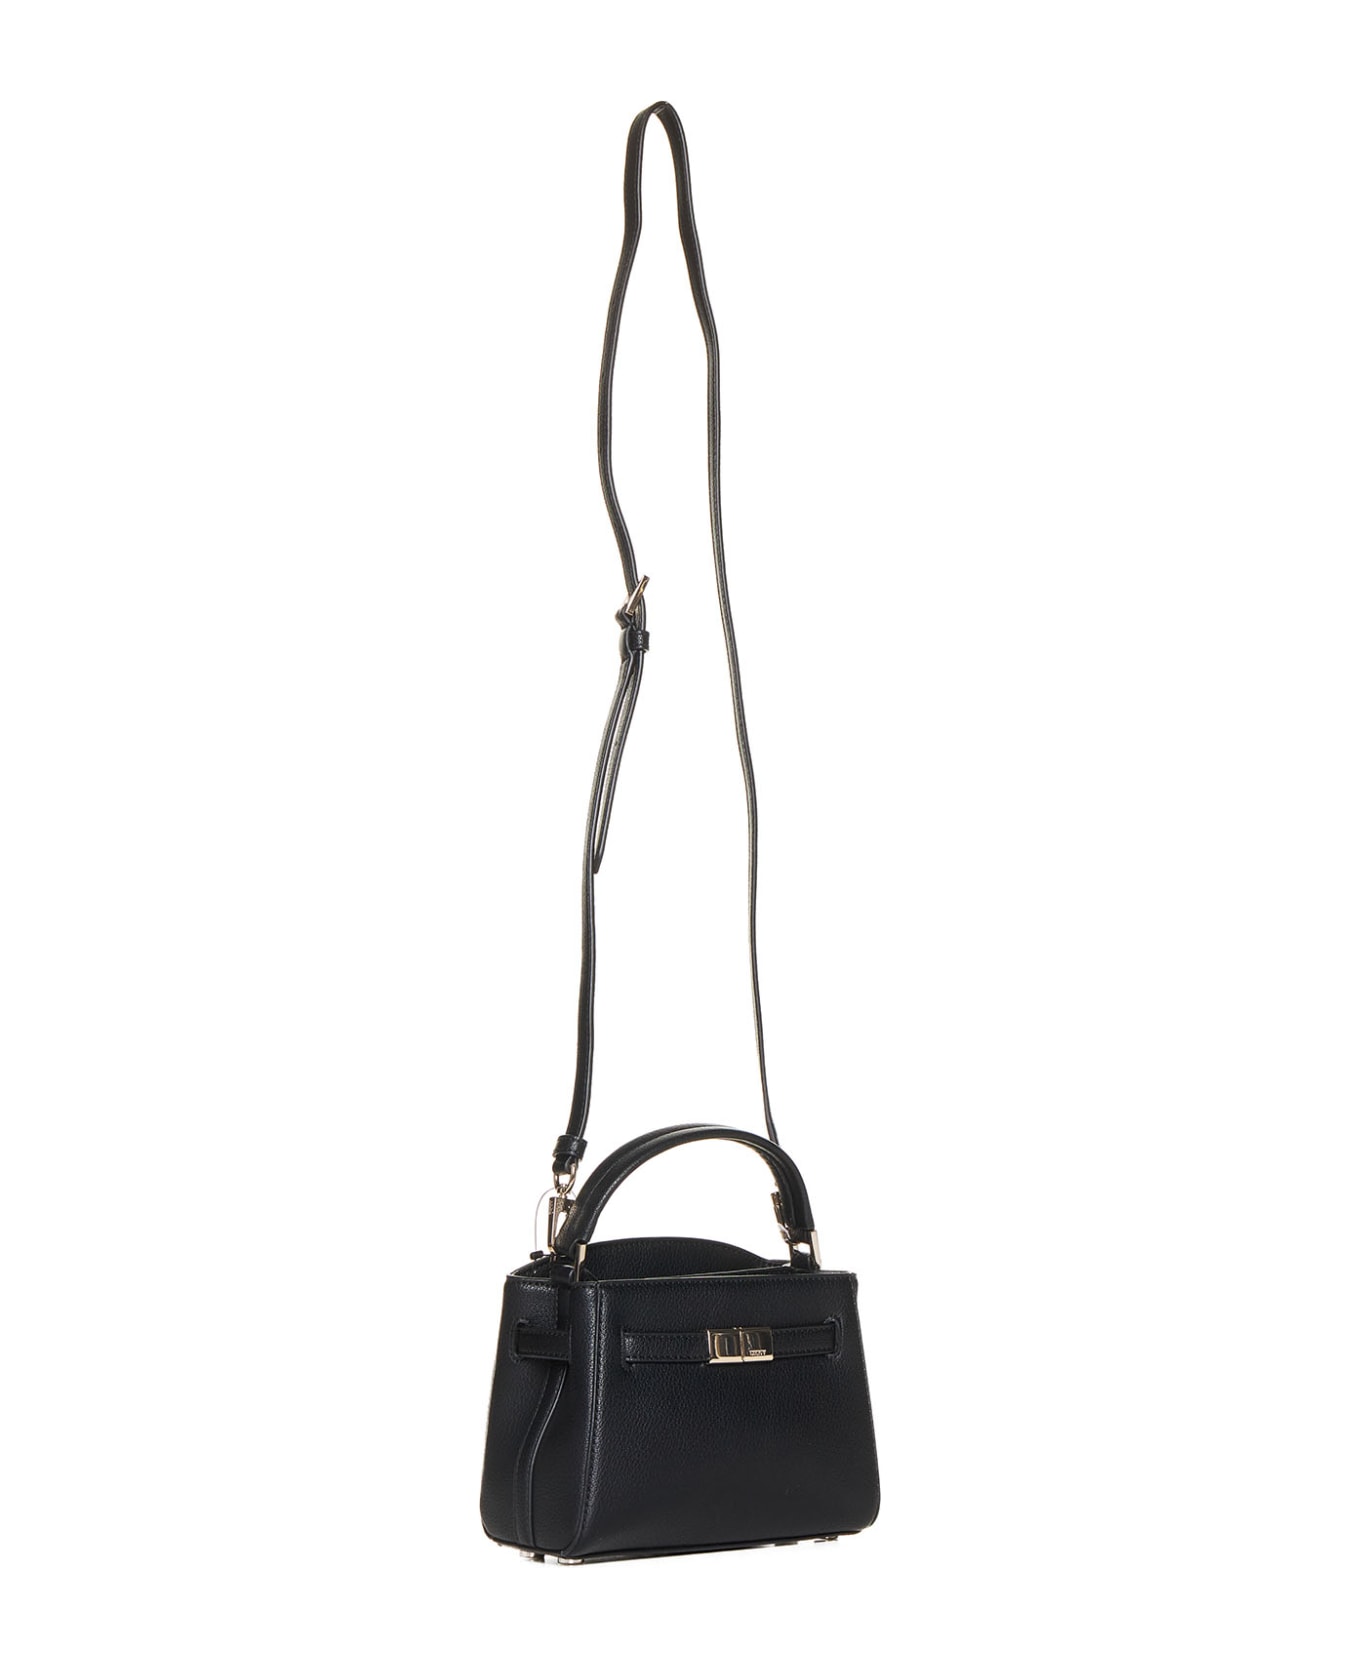 DKNY Tote - Black/gold トートバッグ